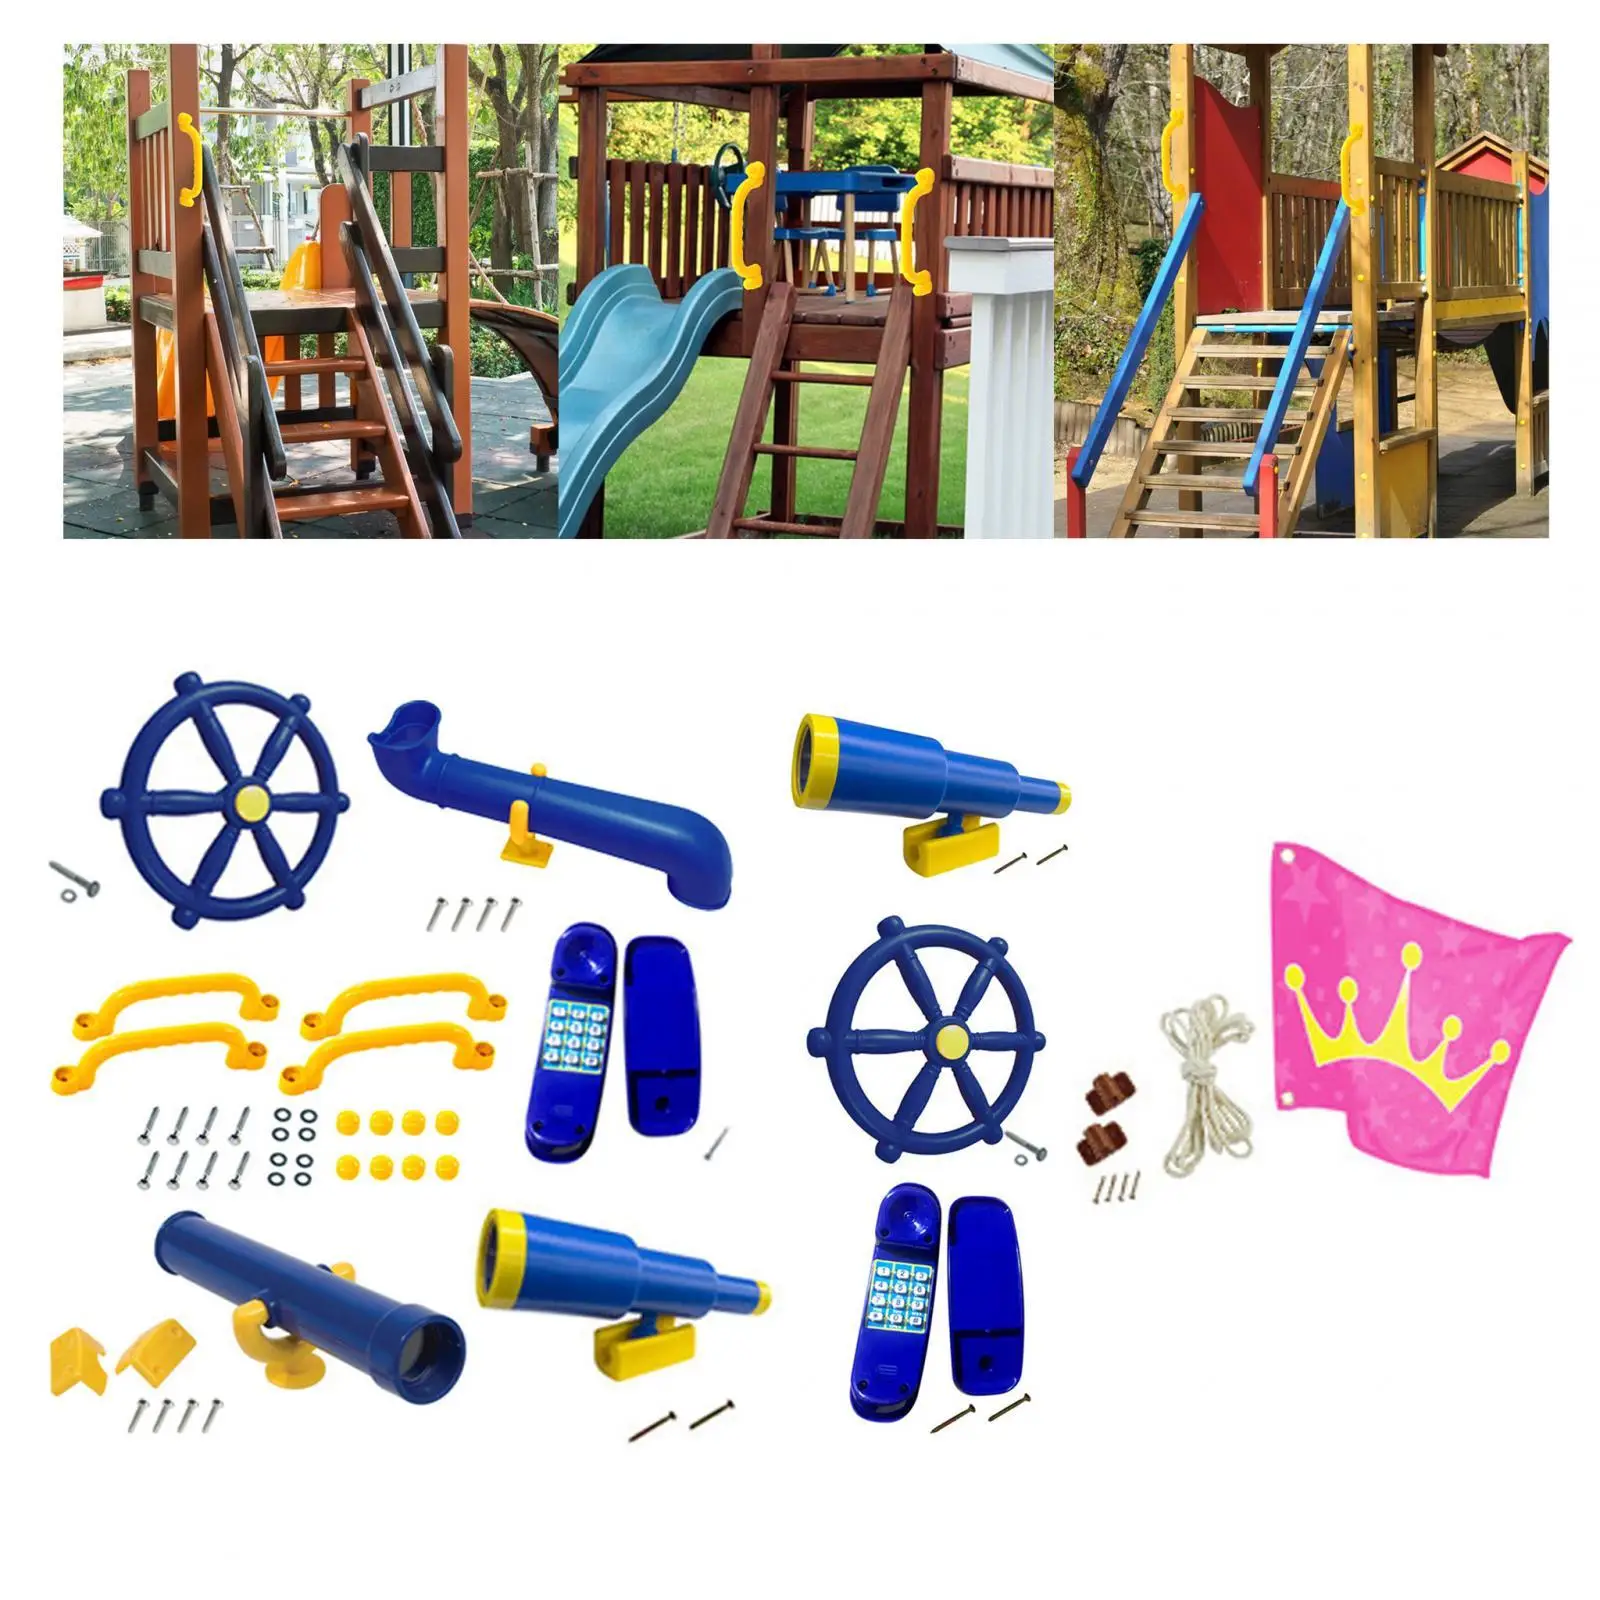 Playground Equipment Steering Wheel Outdoor Playset Swing Playground Accessories for Backyard Play House Outdoor Treehouse Gifts